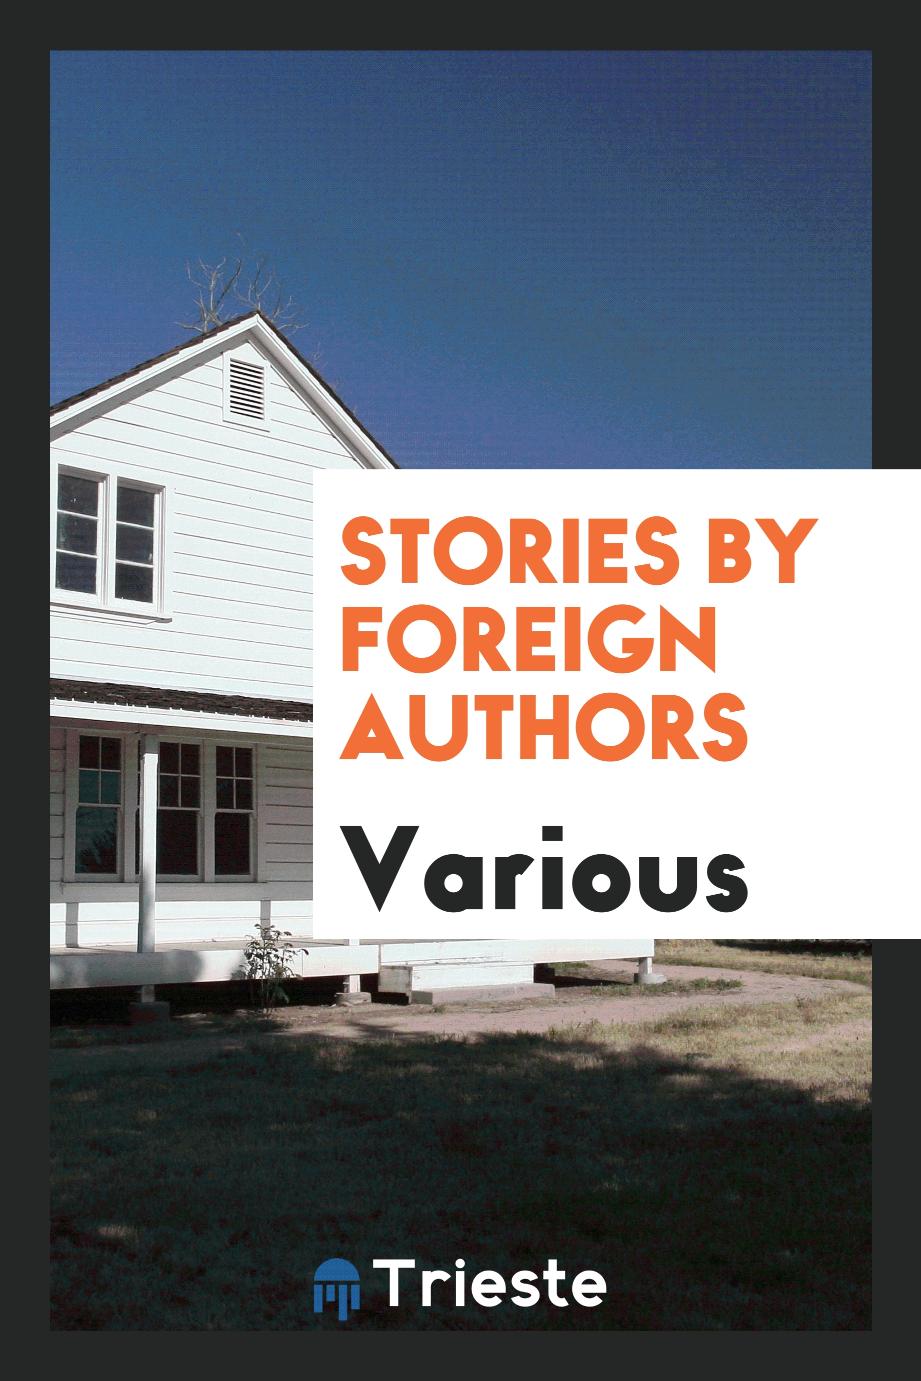 Stories by foreign authors